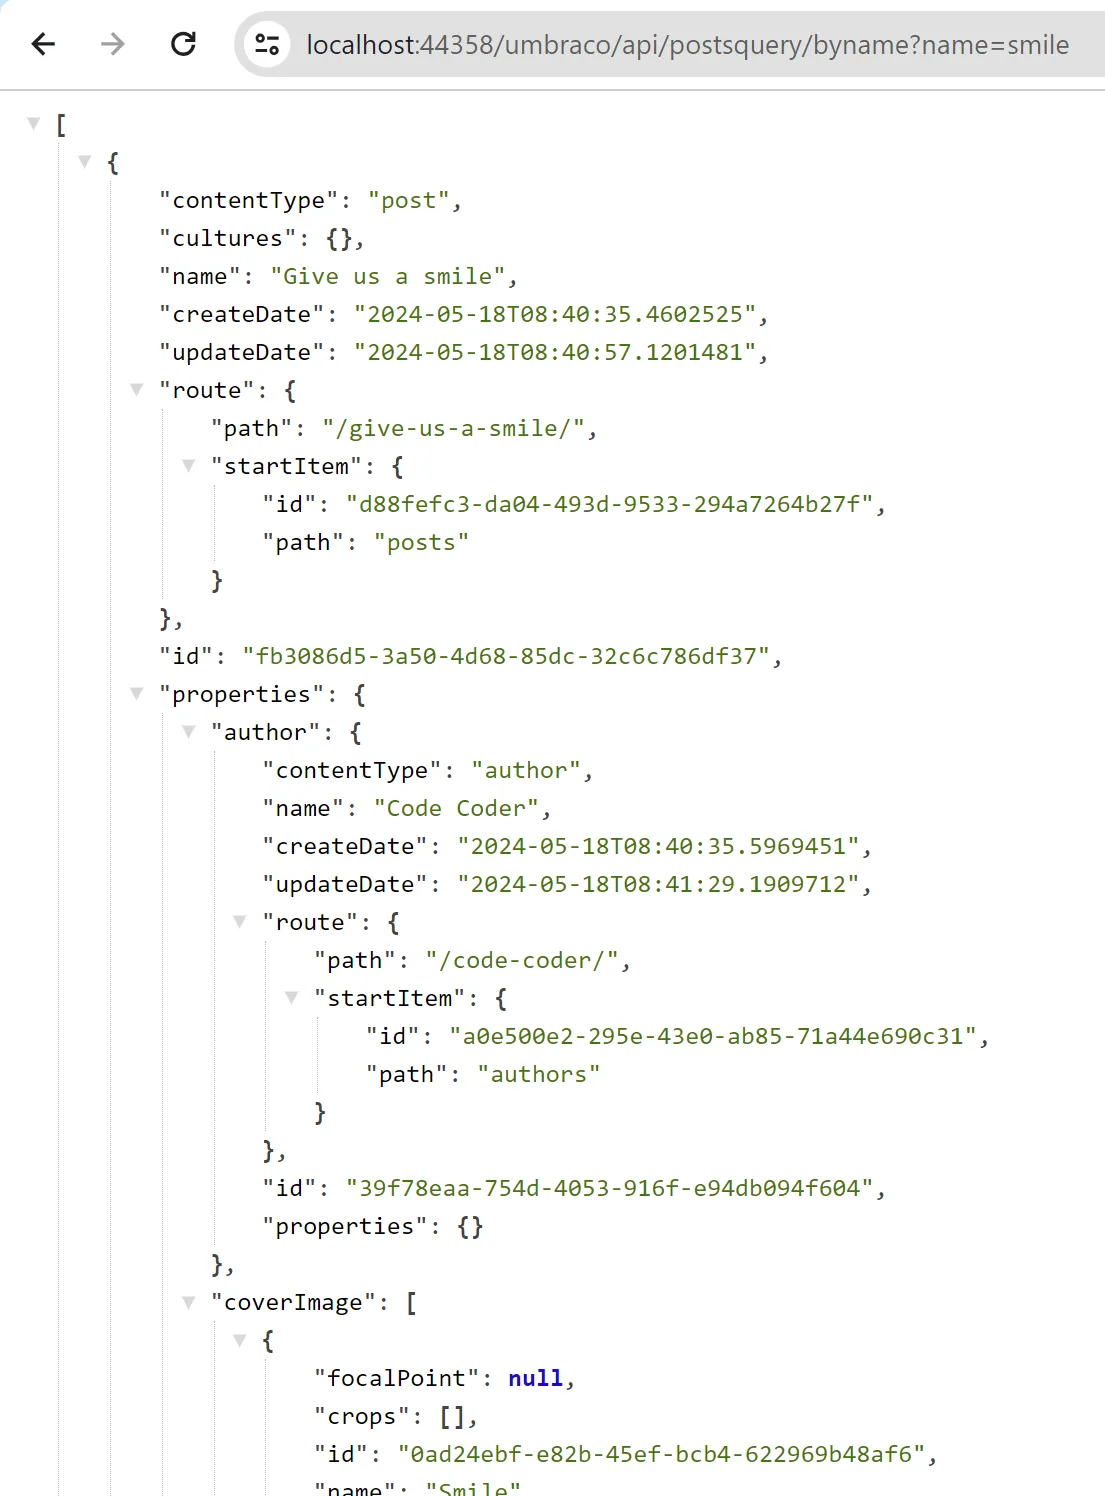 Custom content API output in the Delivery API content format